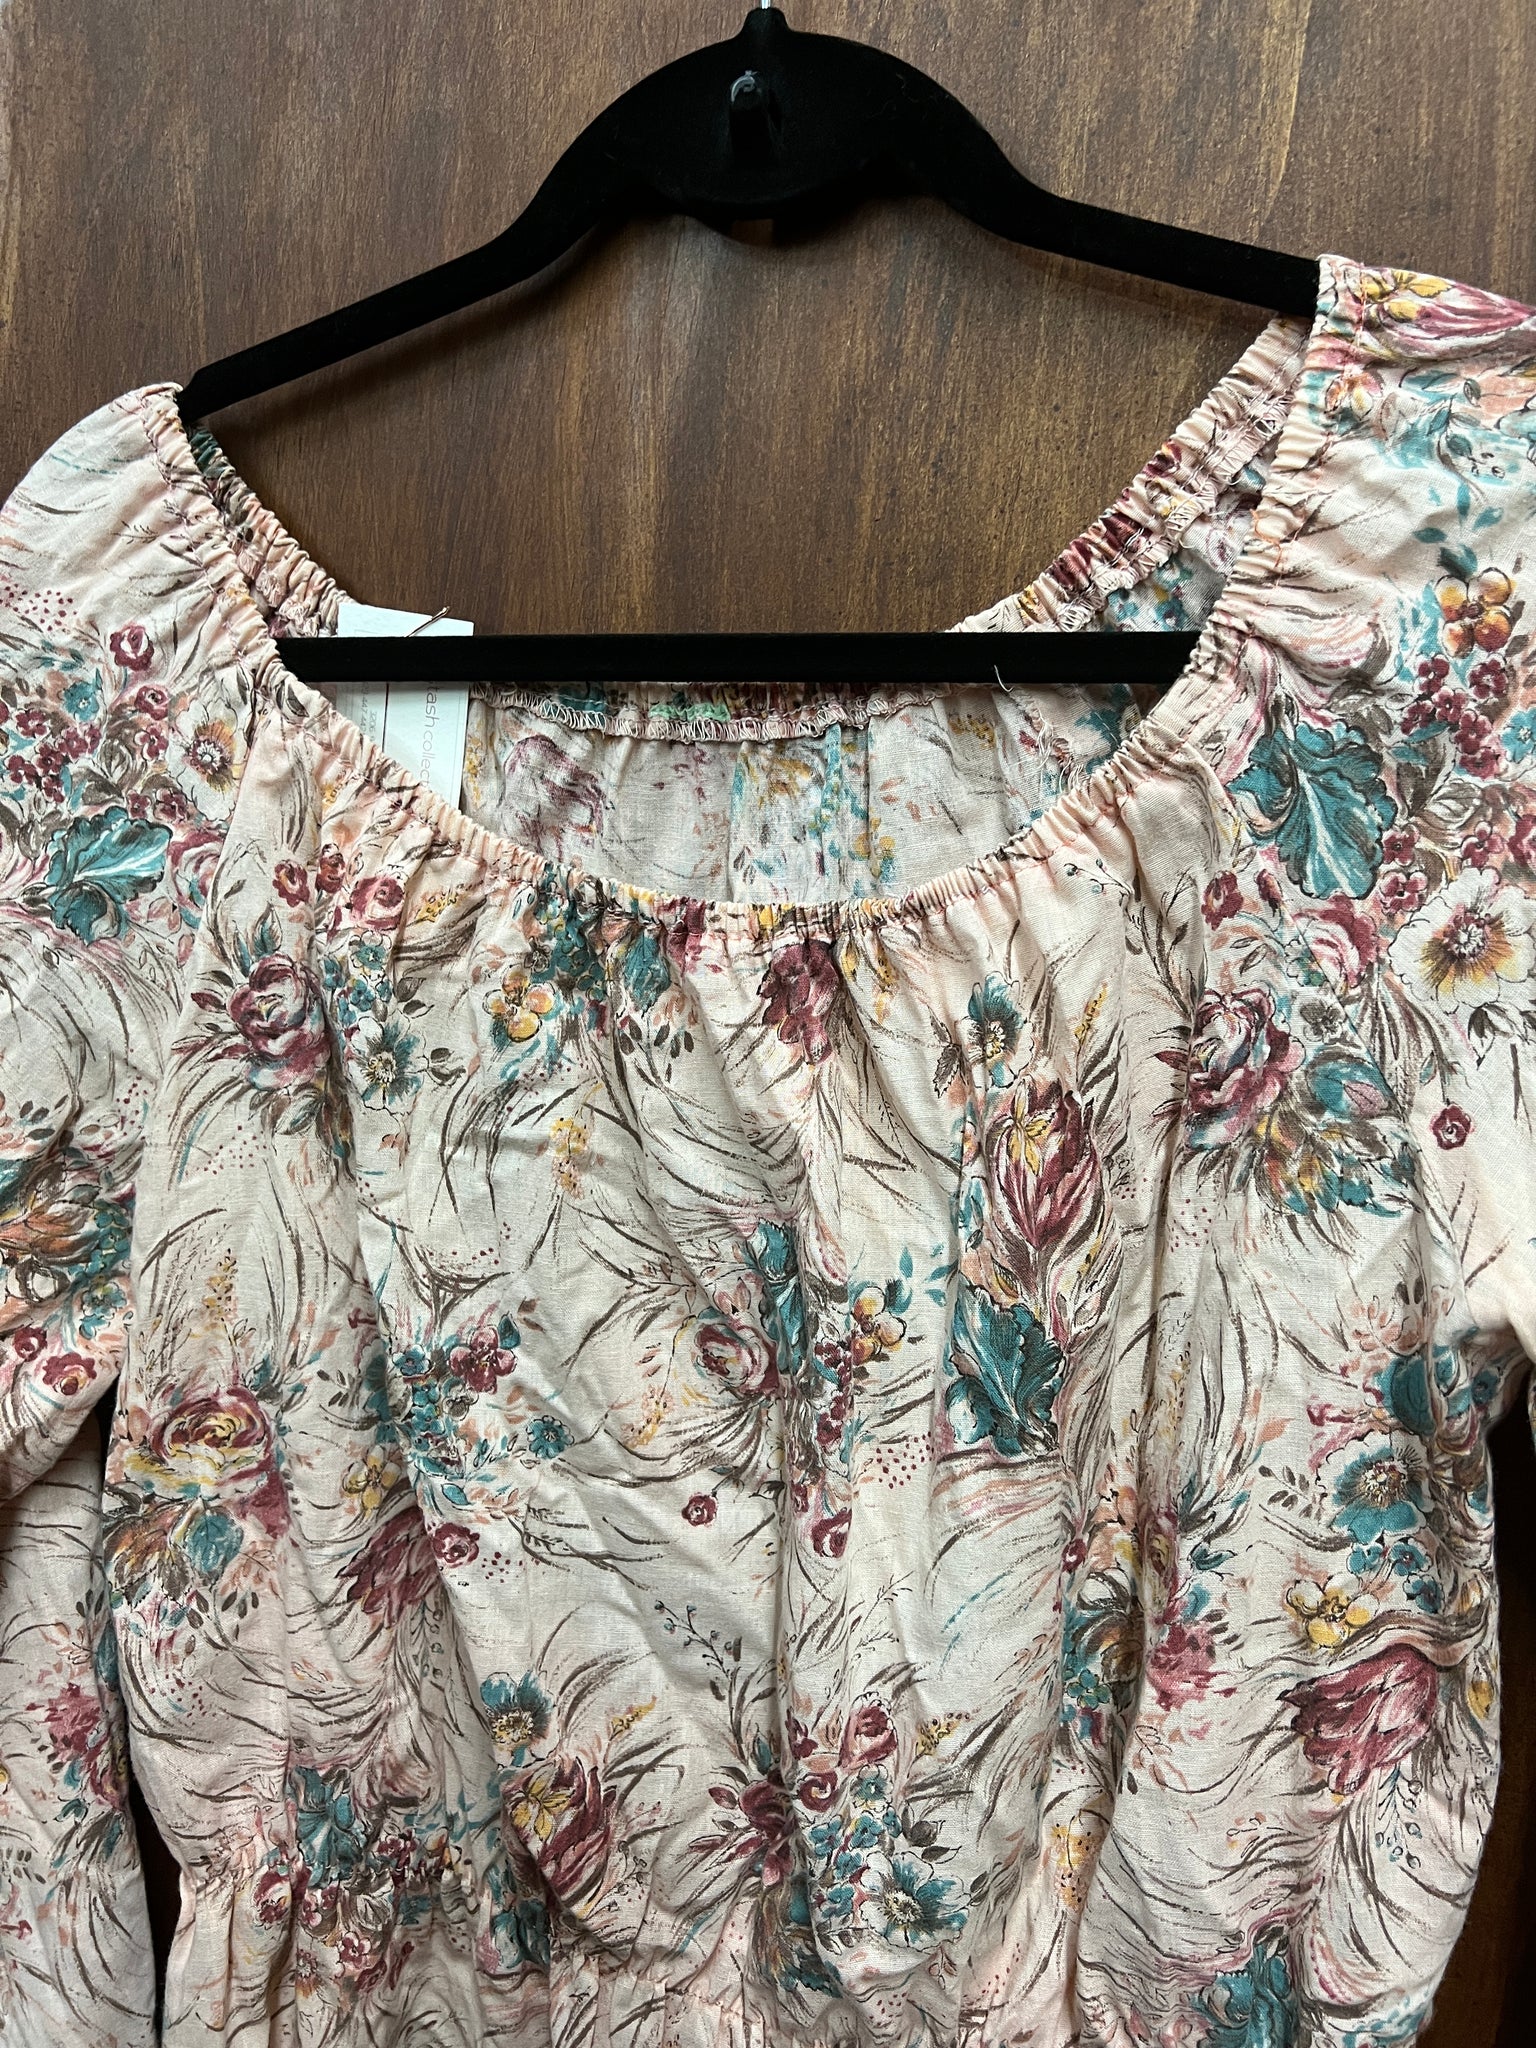 1970s-TOP- light pink floral print peasant style